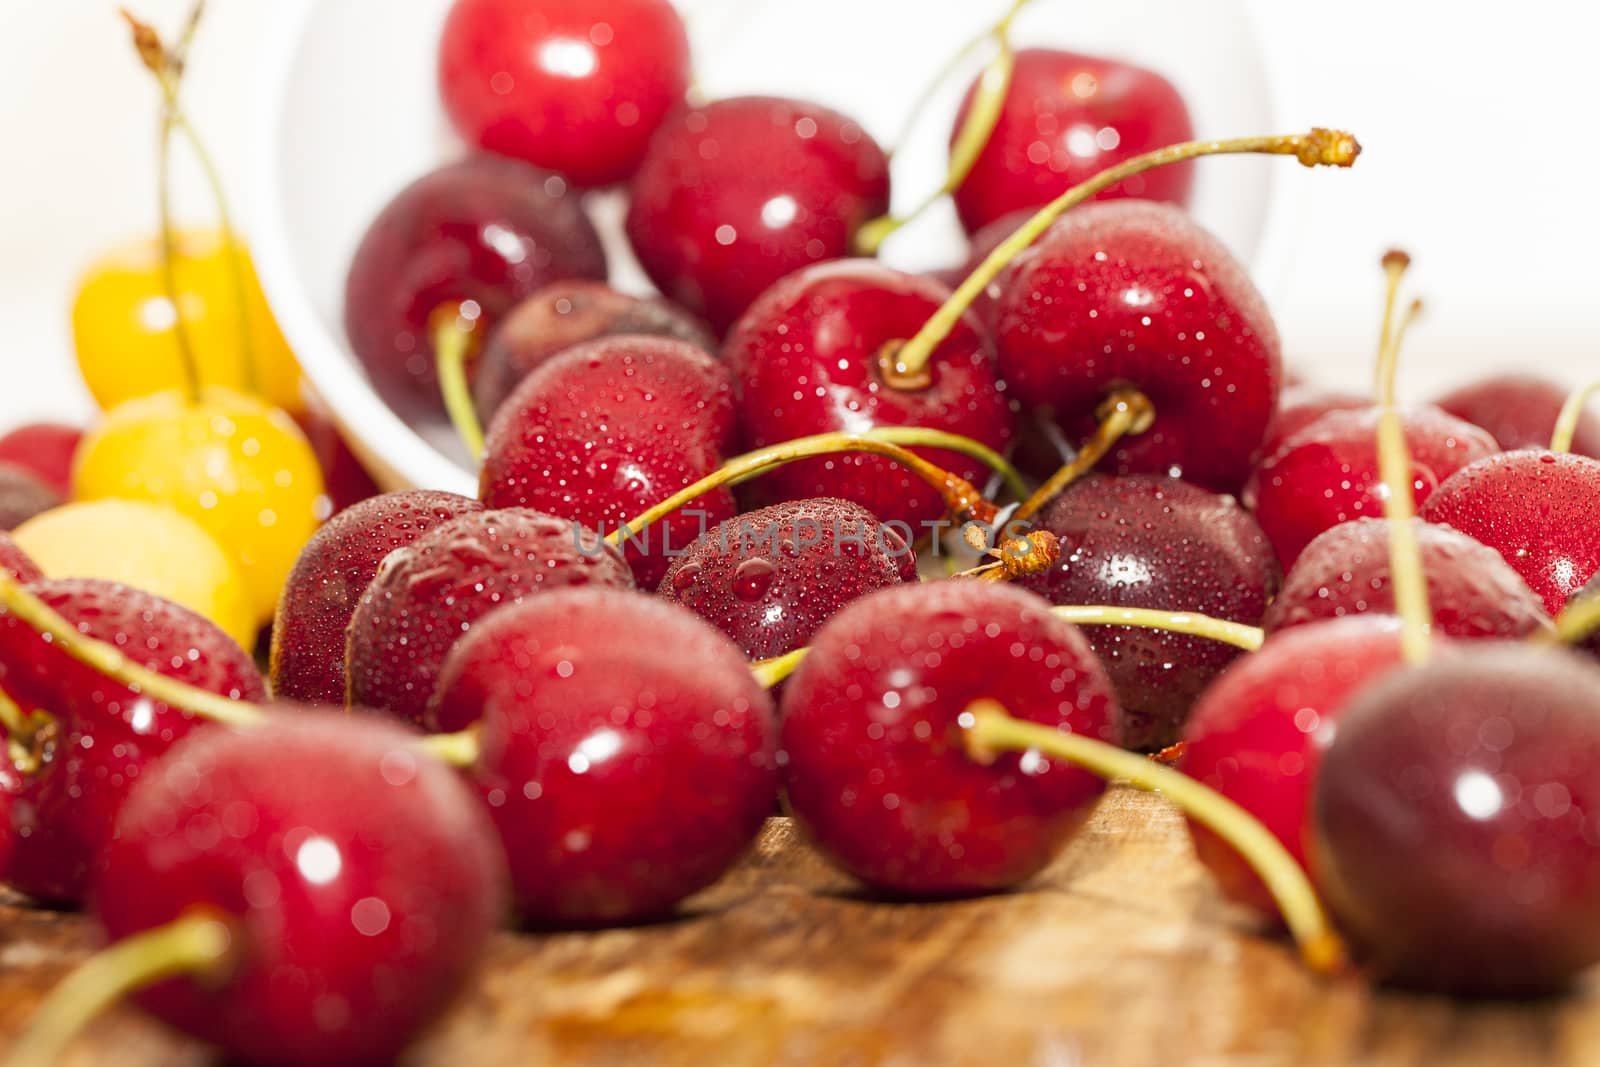 photographed close-up of ripe red cherries covered with water drops, shallow depth of field, white bowl on the table